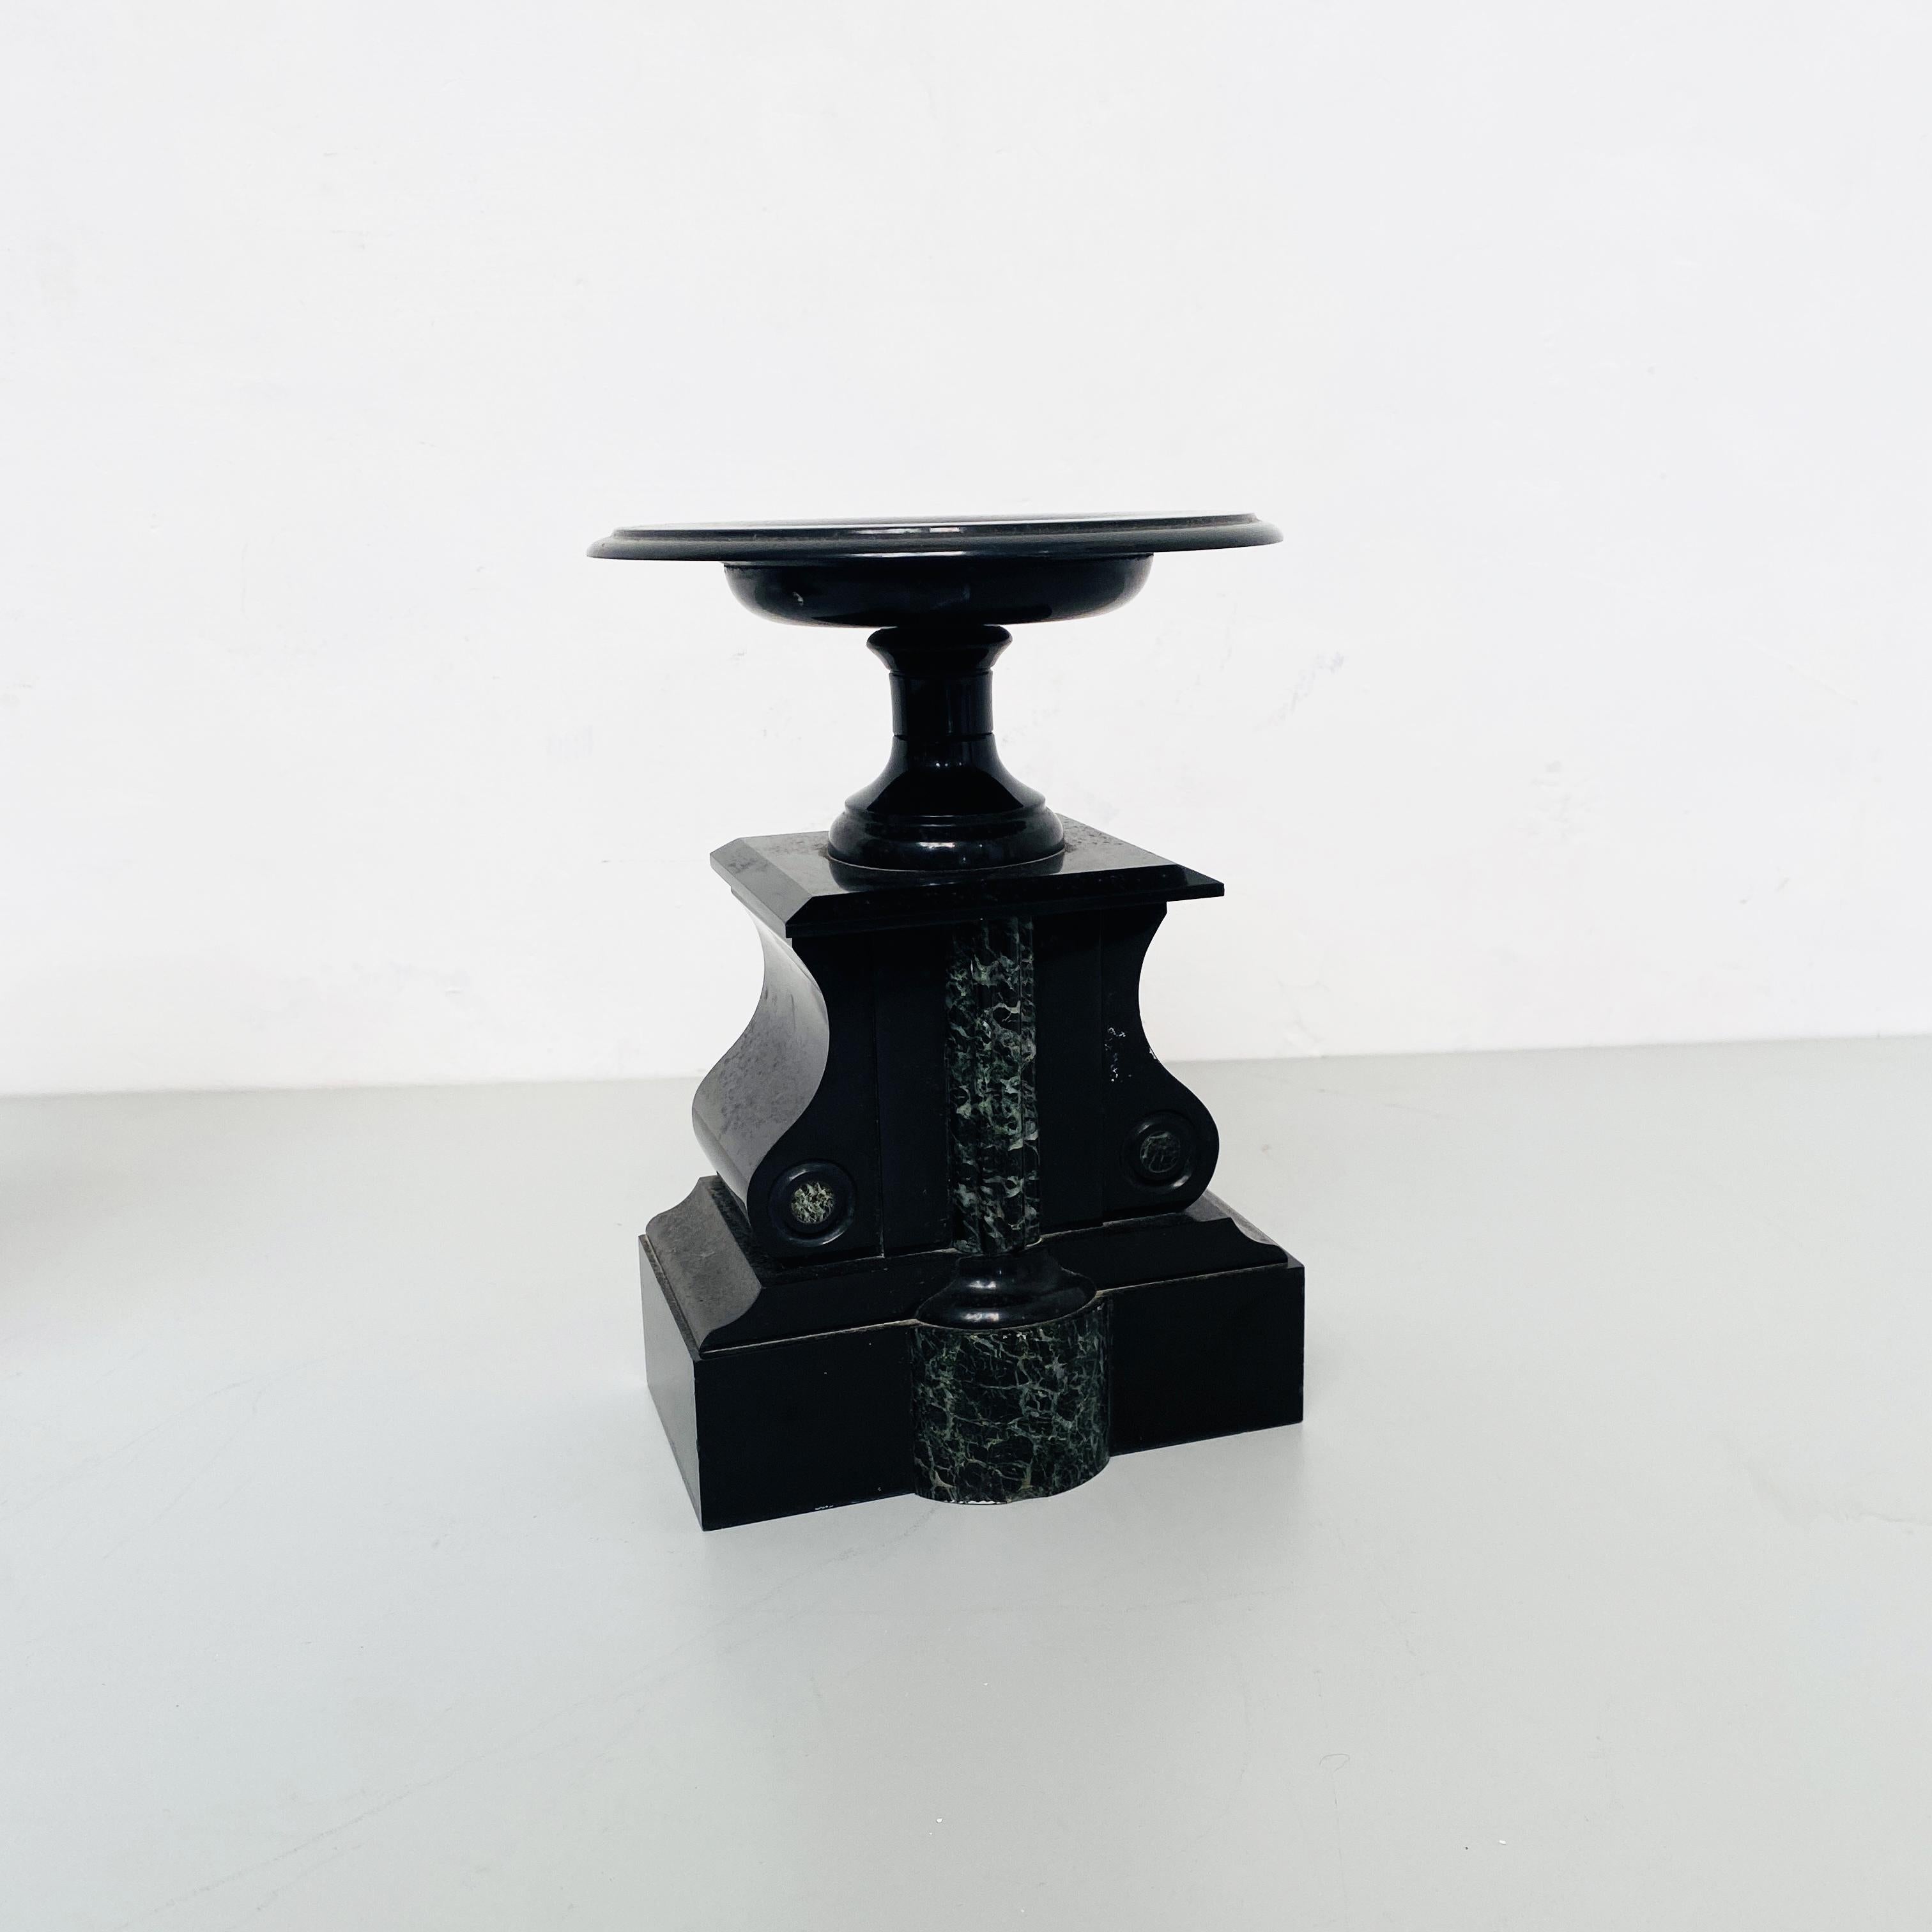 Italian Art Deco Black Onyx Centerpieces with Shape of a Balance, 1940s For Sale 1